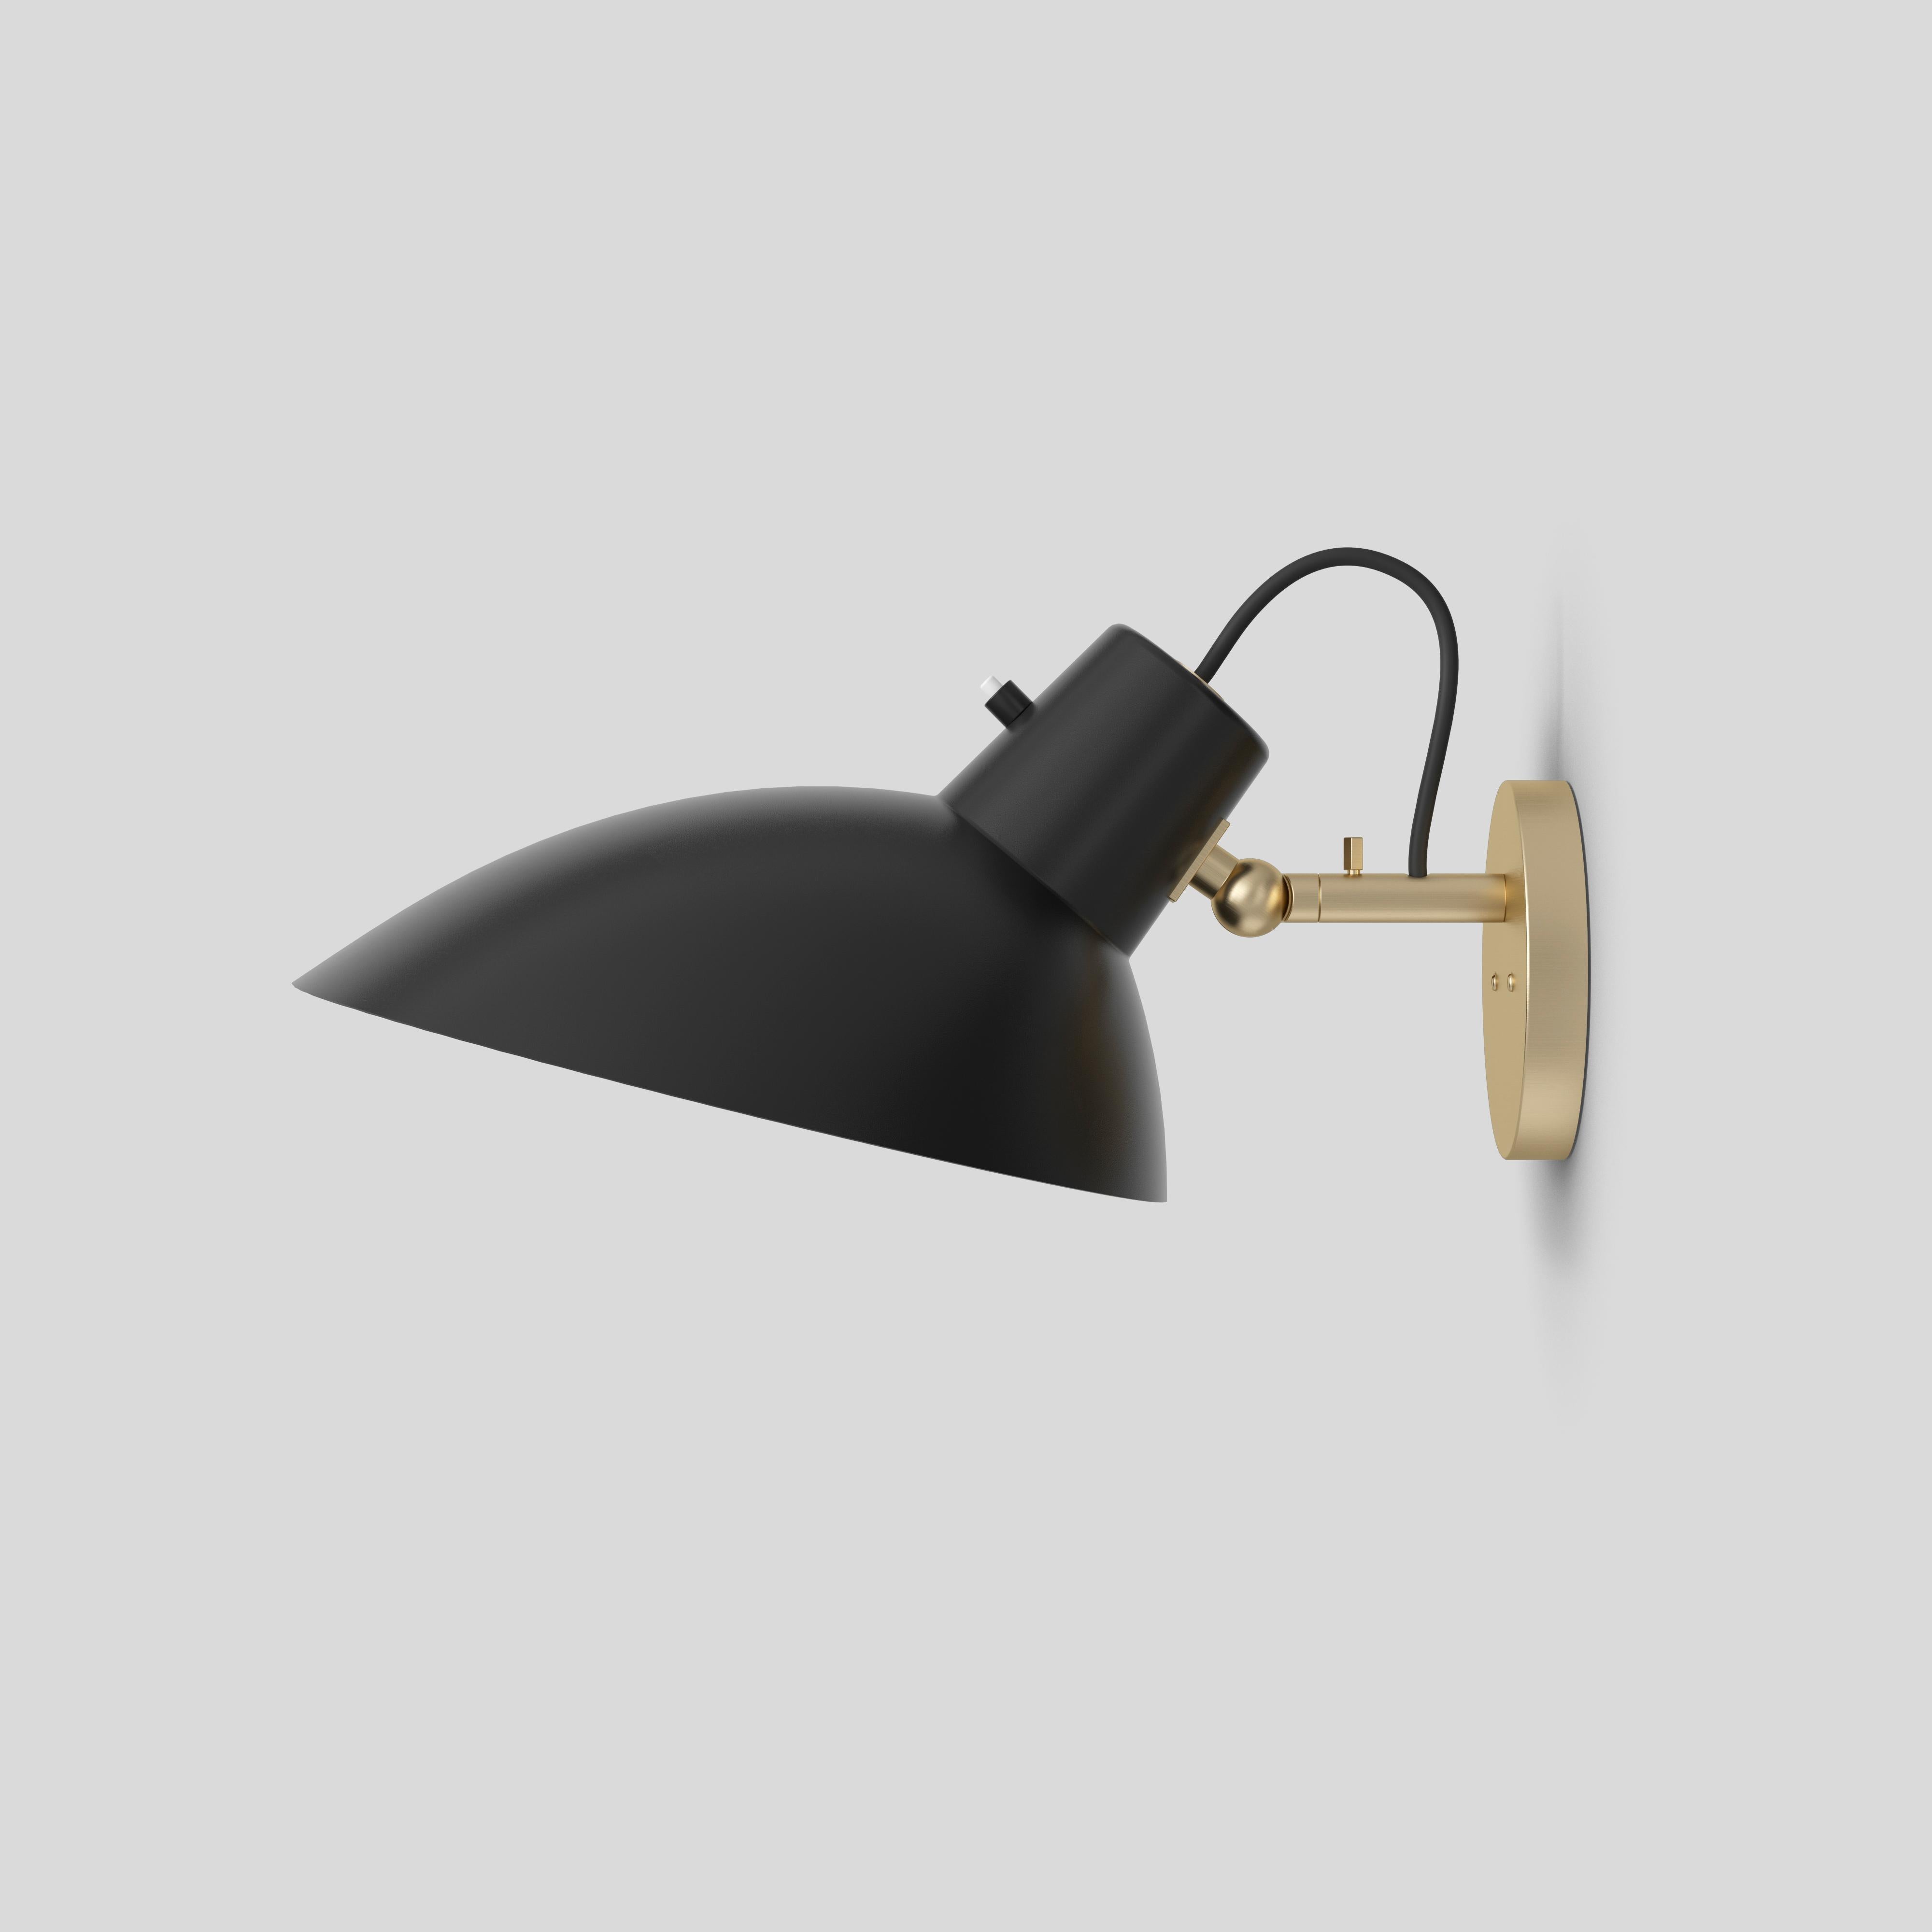 VV Cinquanta wall
Design by Vittoriano Viganò
This version is with black lacquered reflector and brass mount, including switch.

The VV Cinquanta features an elegant and versatile posable direct light source that can swivel and tilt. The Wall model